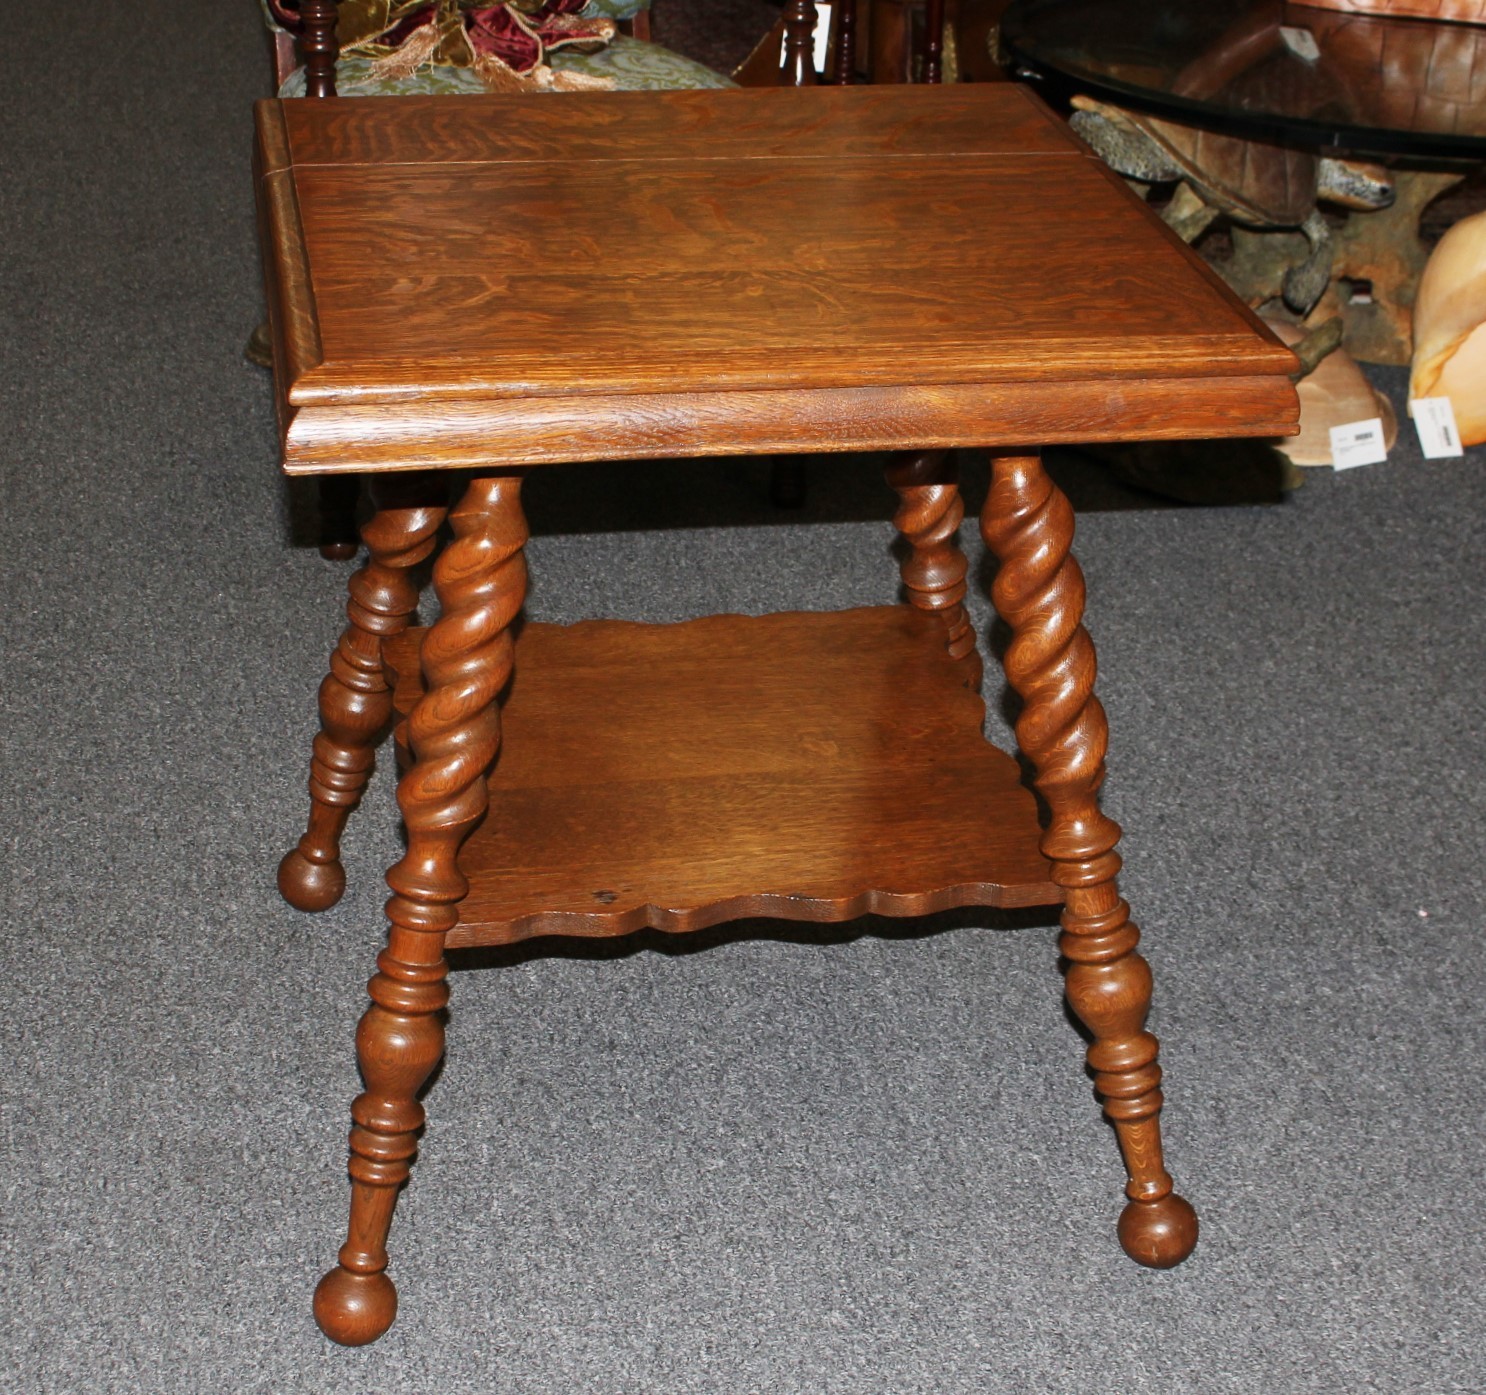 Antique English Oak Barley Twist Side Table Parlor Stand with Lower Shelf